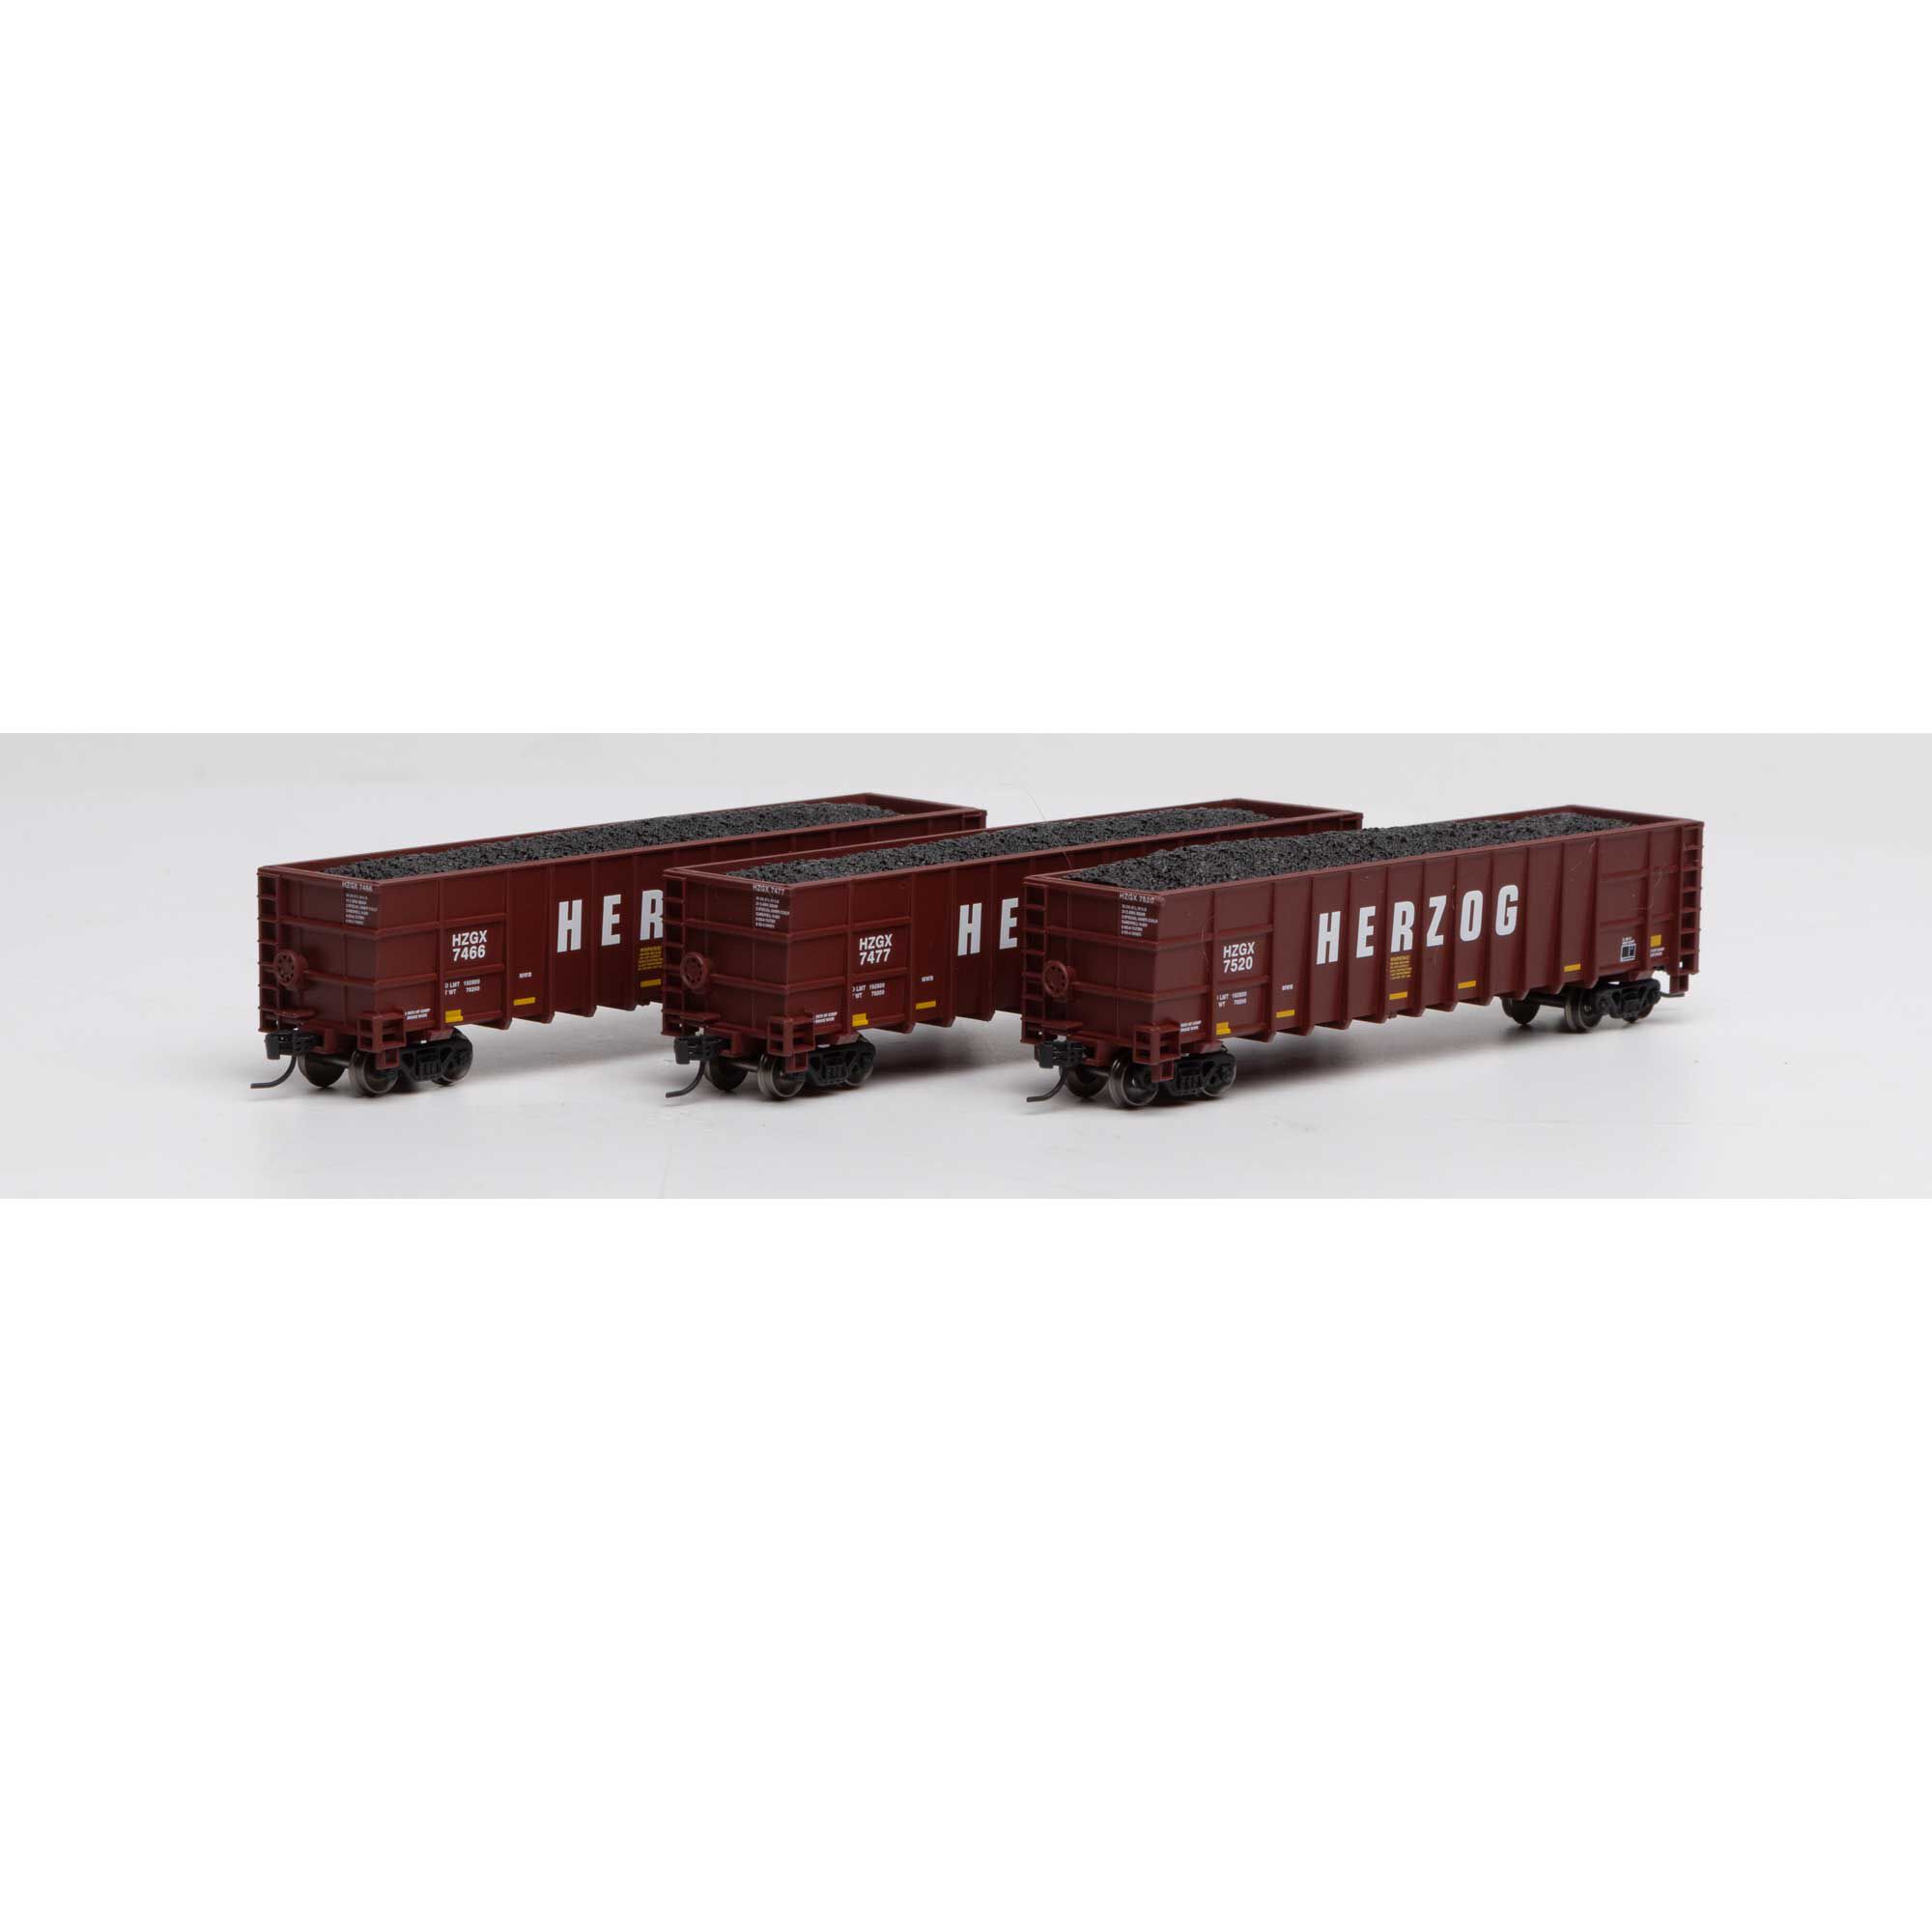 Details about   Athearn N Commonwealth Edison 4060,4136,4142 Thrall High-Side Gondolas #ATH5934 